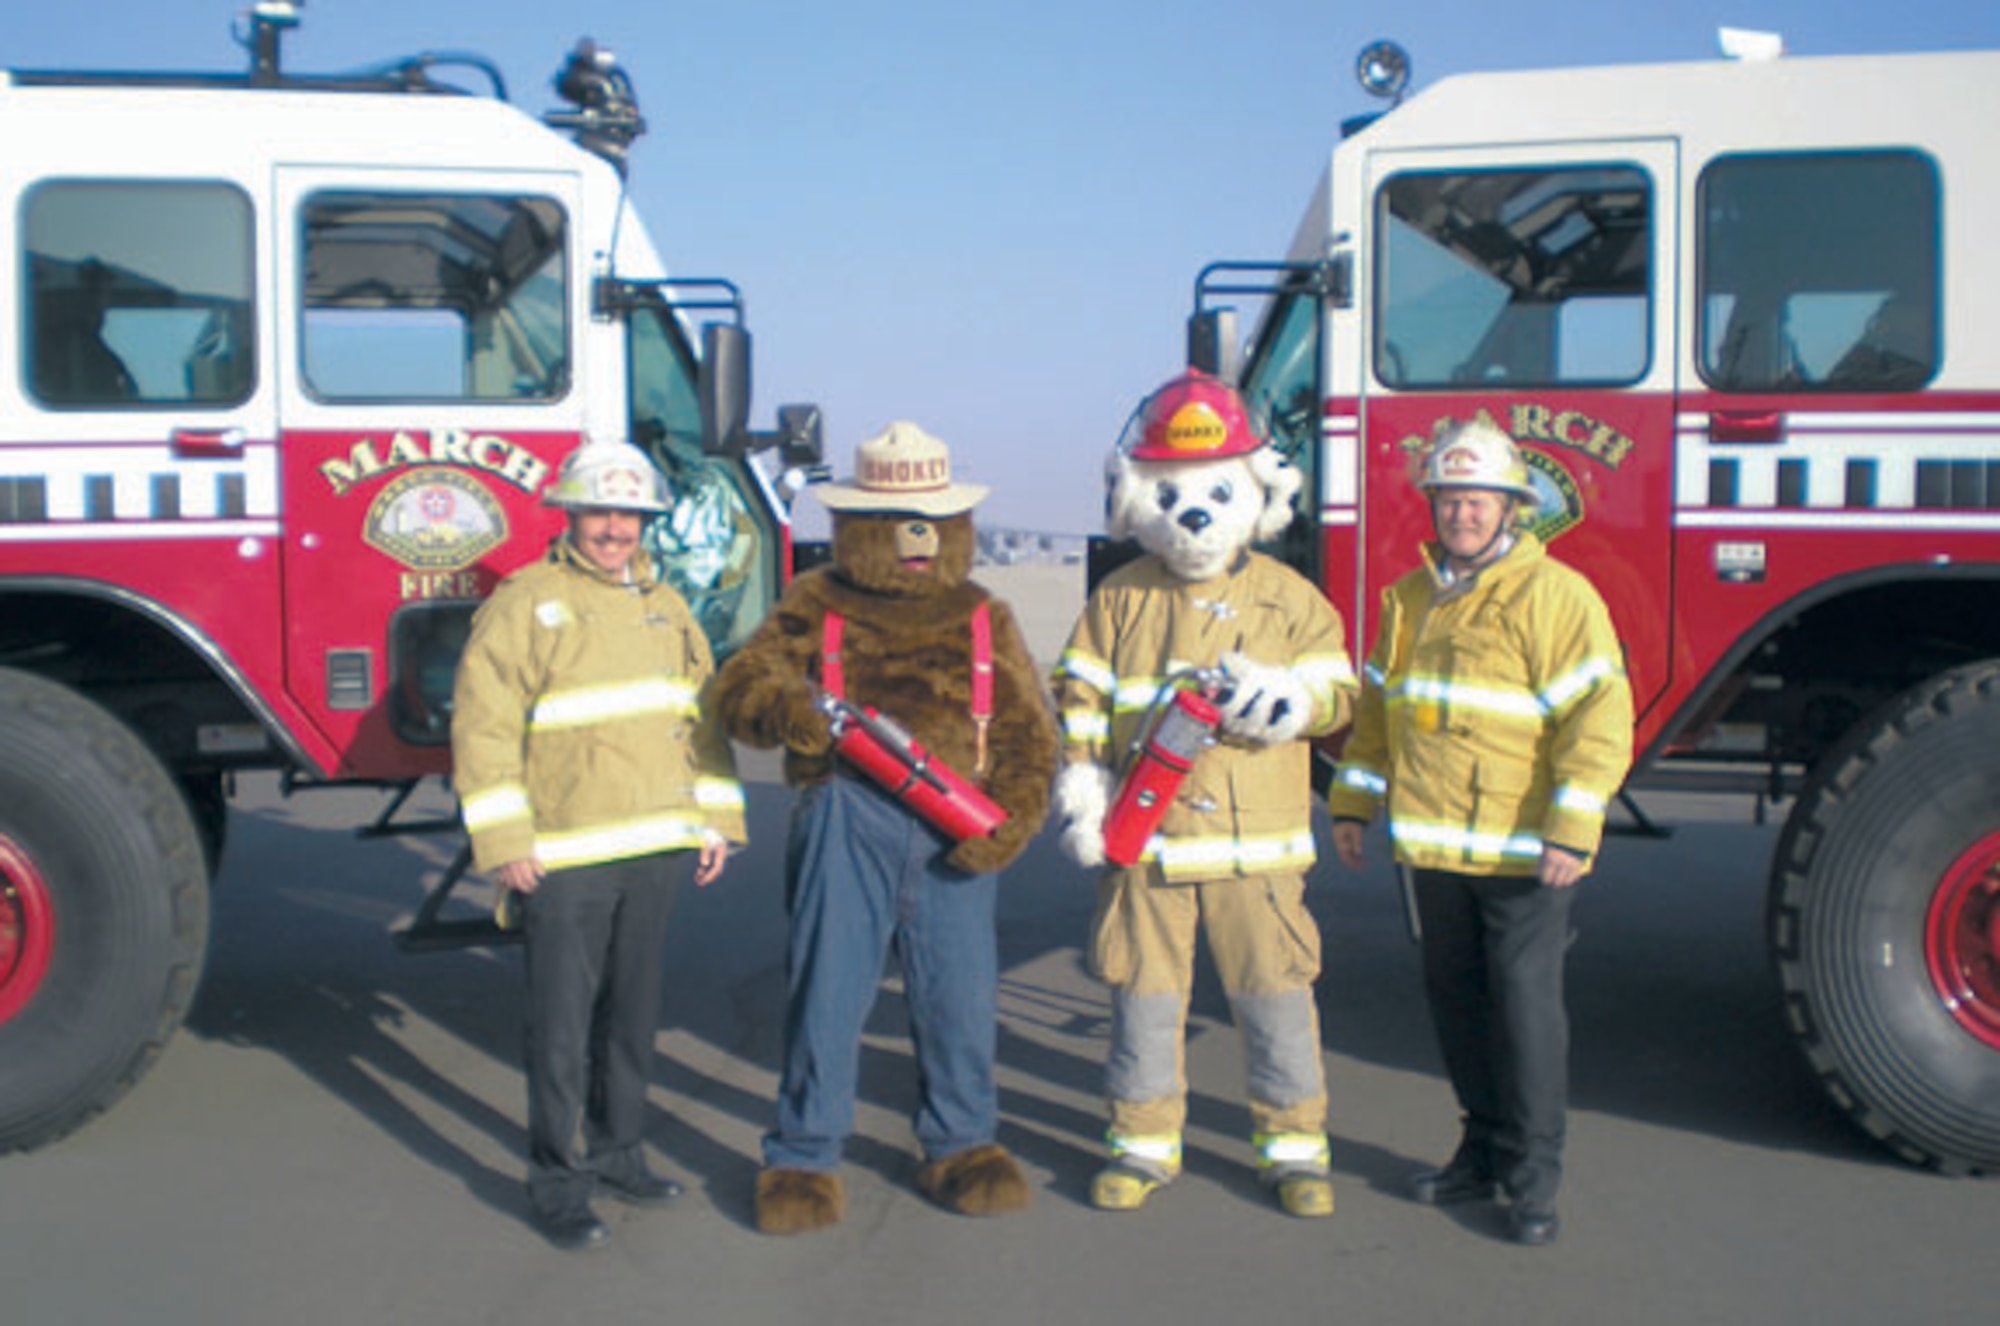 March Fire Chief Jeffrey Konersman (right) and Assistant Chief of Prevention Harold Sterne (left), prepare for Fire Prevention week by posing for a photo with Smokey, Sparky and two fire engines at the March Air Reserve Base Fire Department, Sept. 27, 2010.  (U.S. Air Force photo/ Timothy Williams)